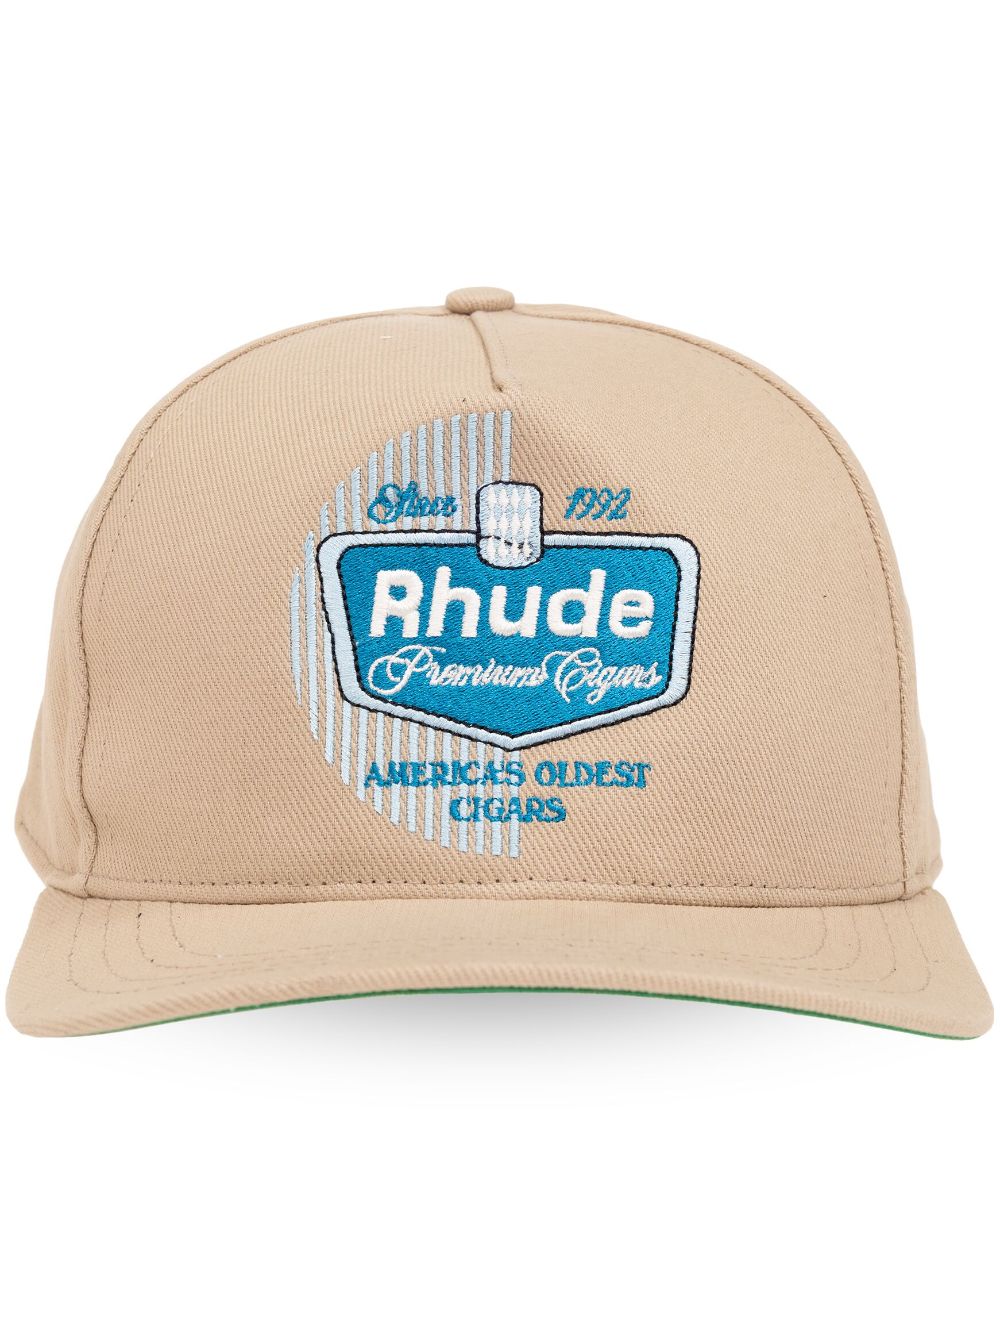 Rhude Cigaro Embroidered Cap In Neutral